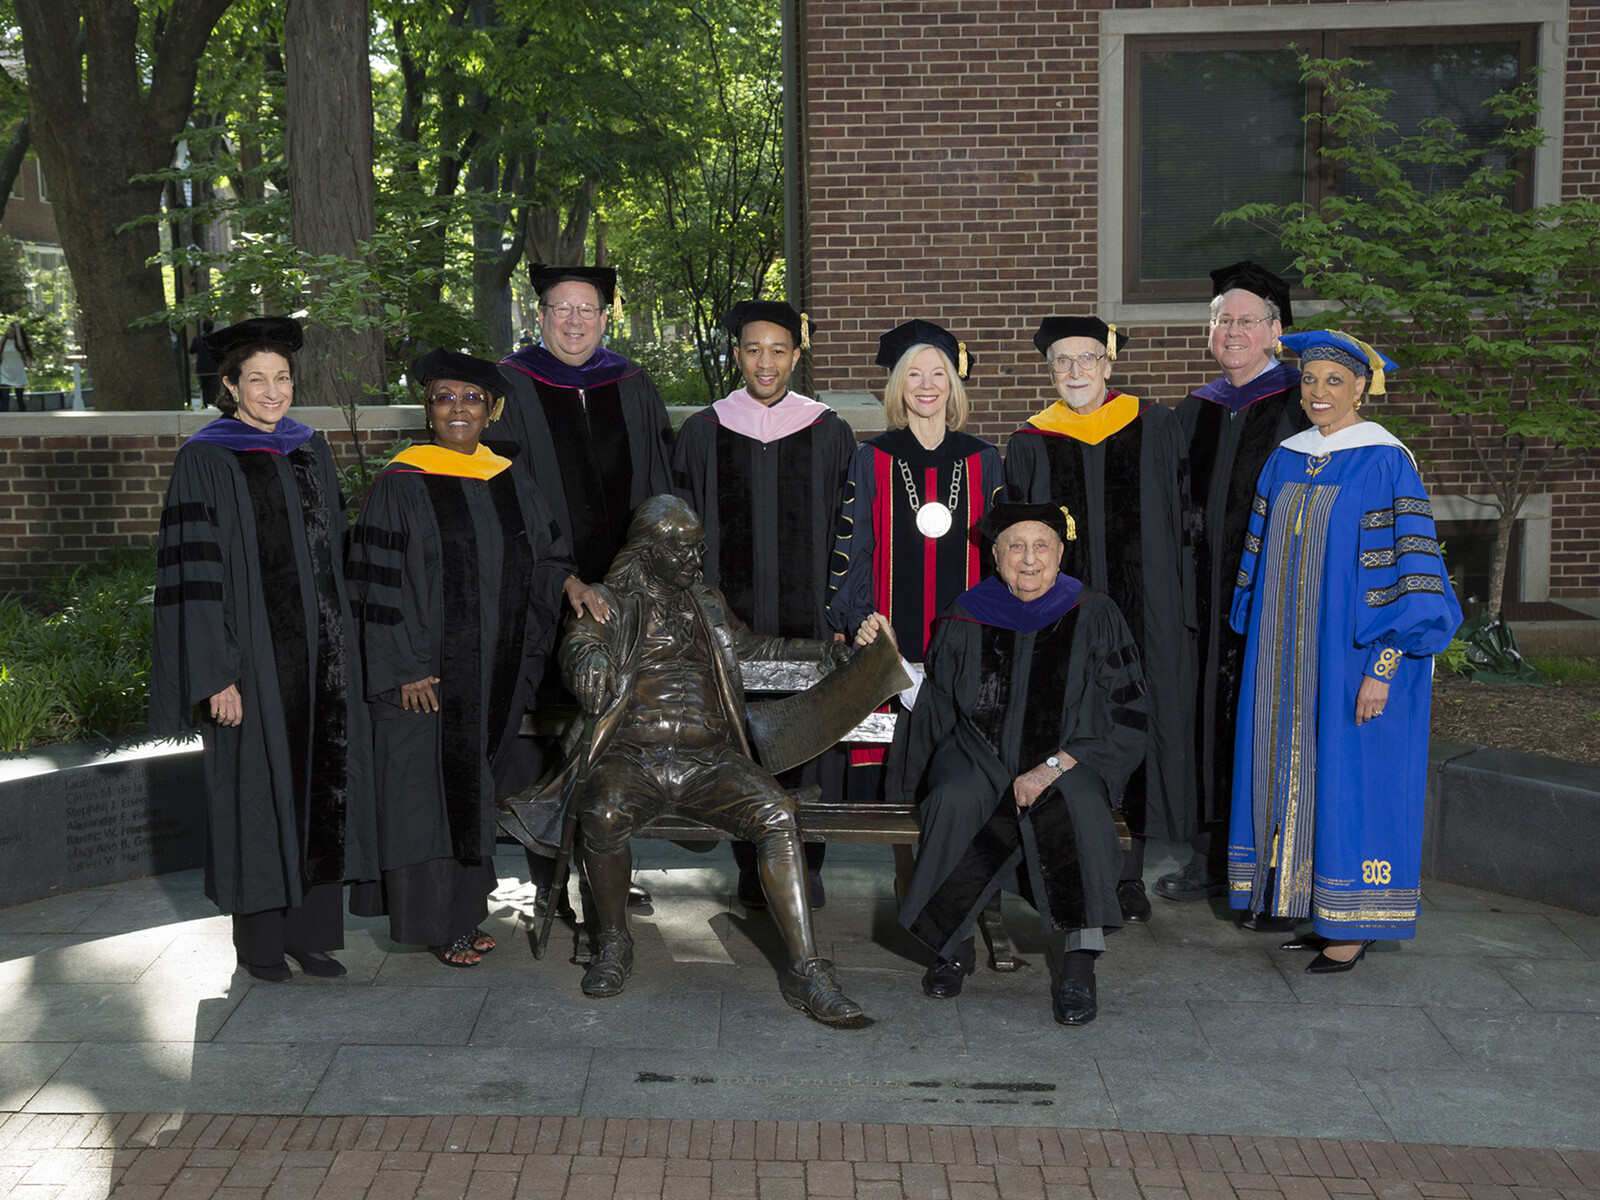 Amy Gutmann and 2014 Penn honorary degree recipients in regalia